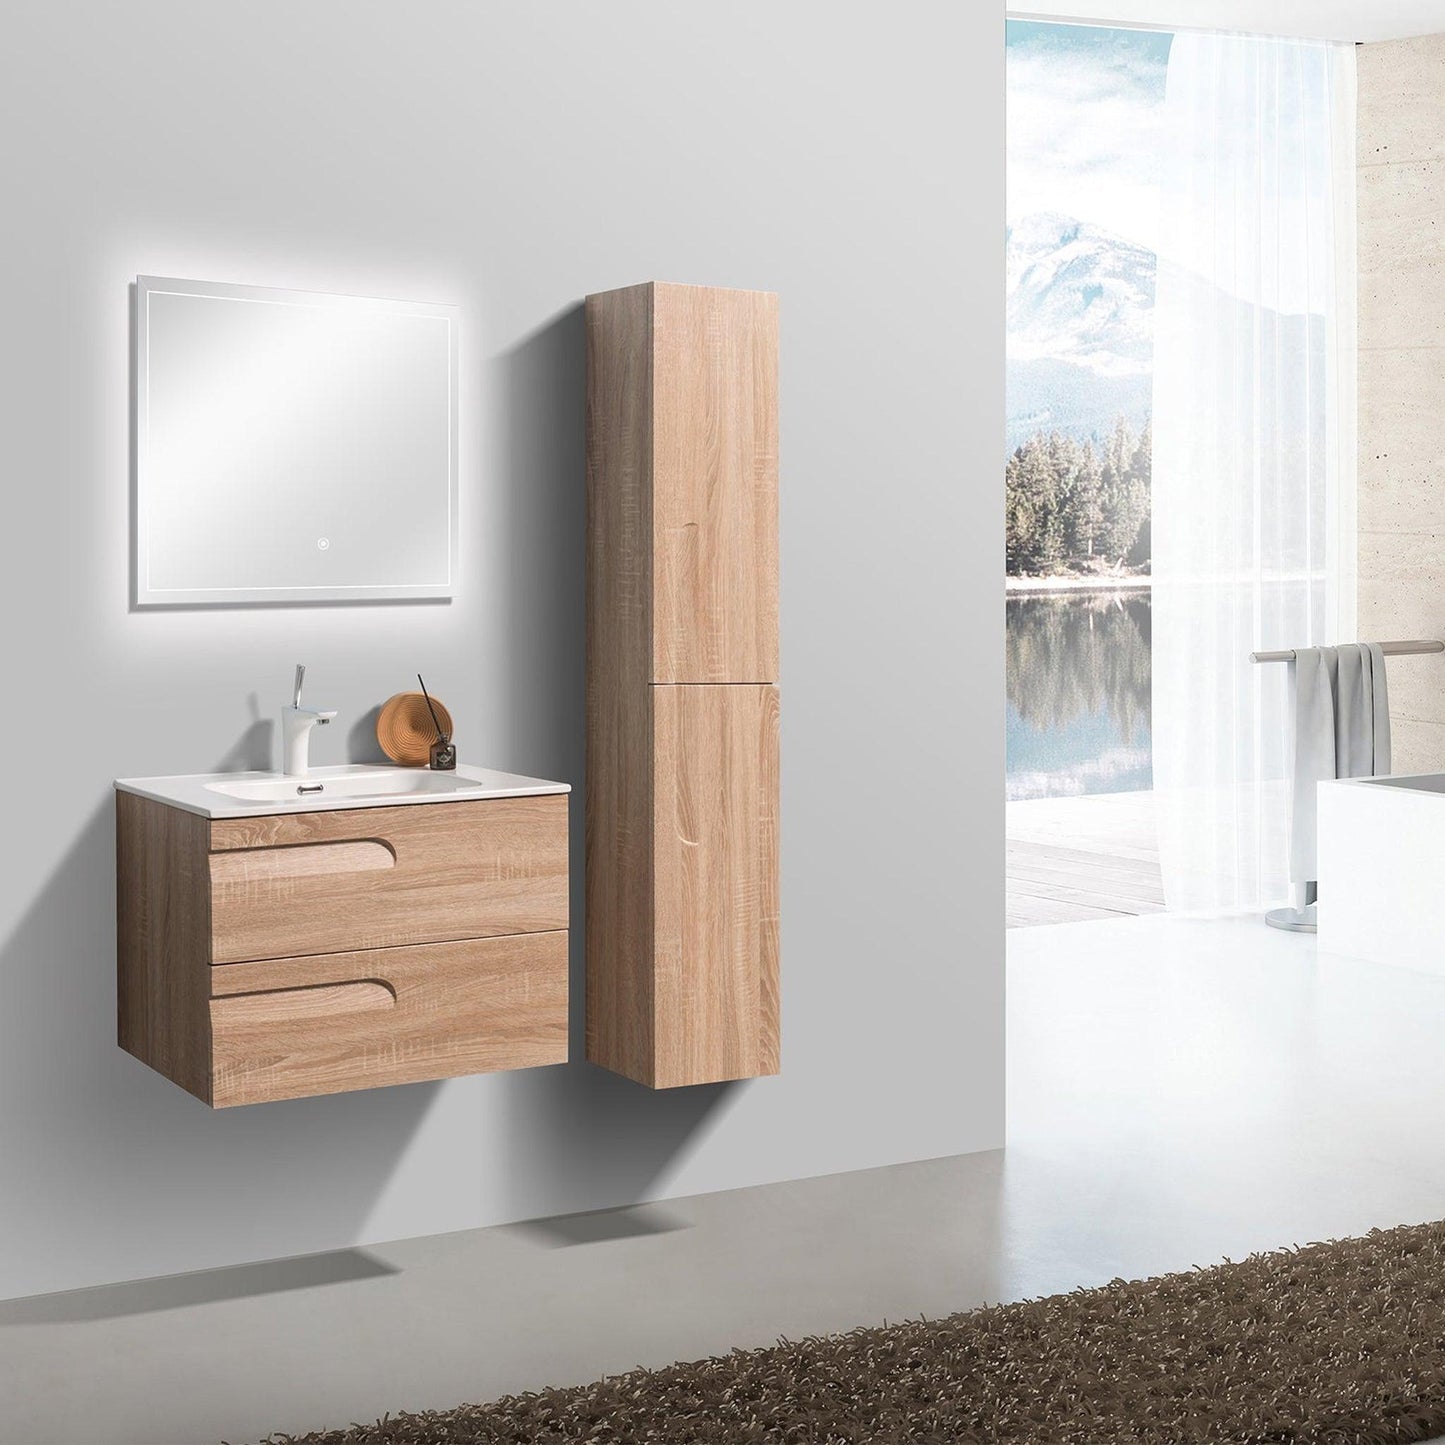 Eviva Joy 28" x 21" Maple Wall-Mounted Bathroom Vanity With White Integrated Sink